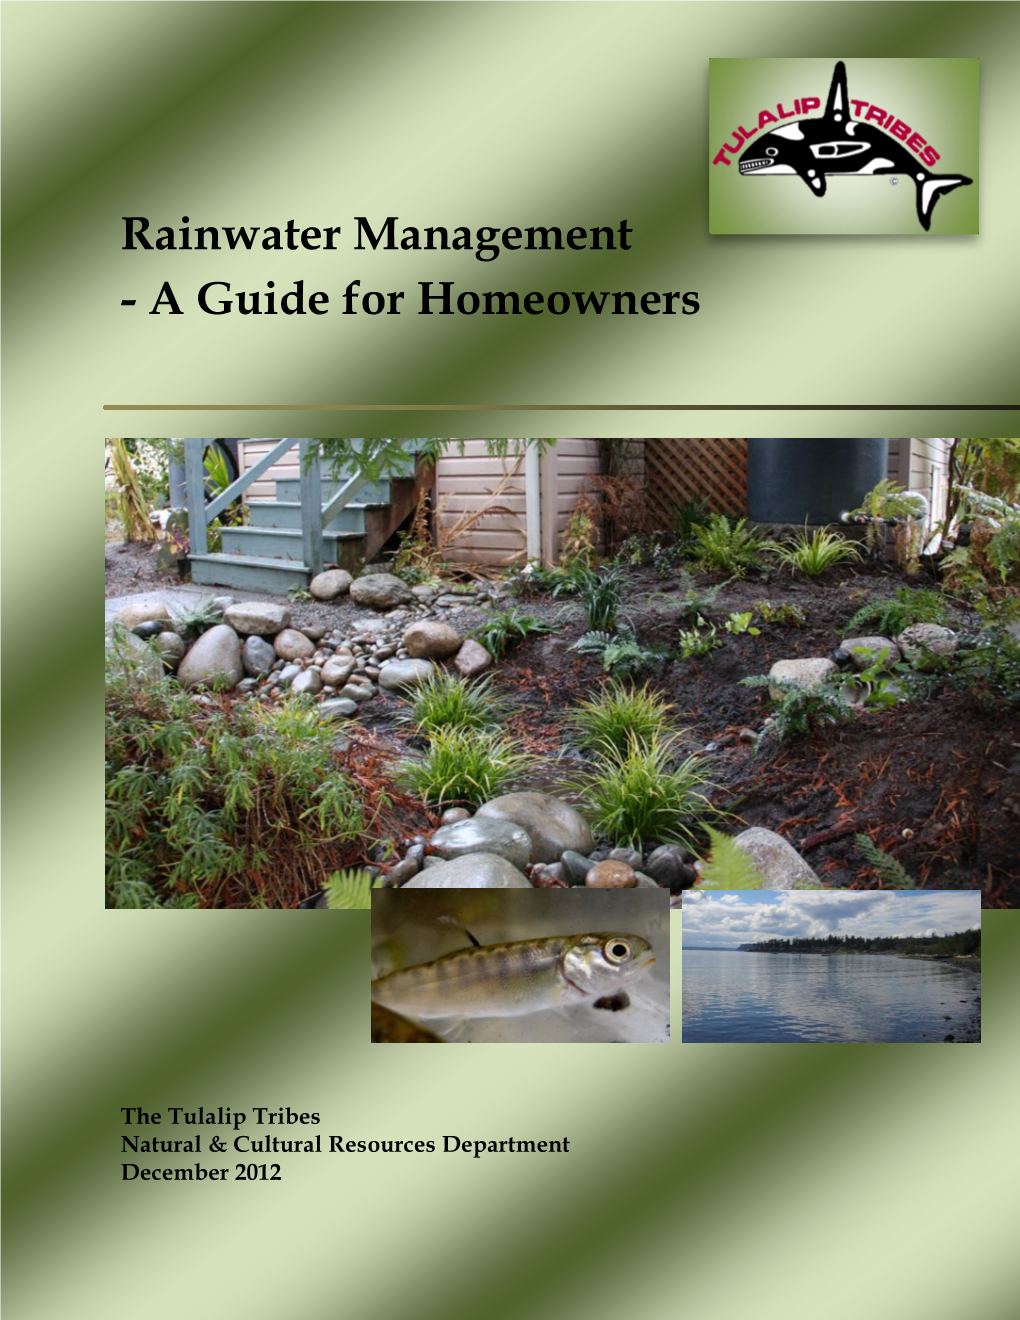 Rainwater Management - a Guide for Homeowners